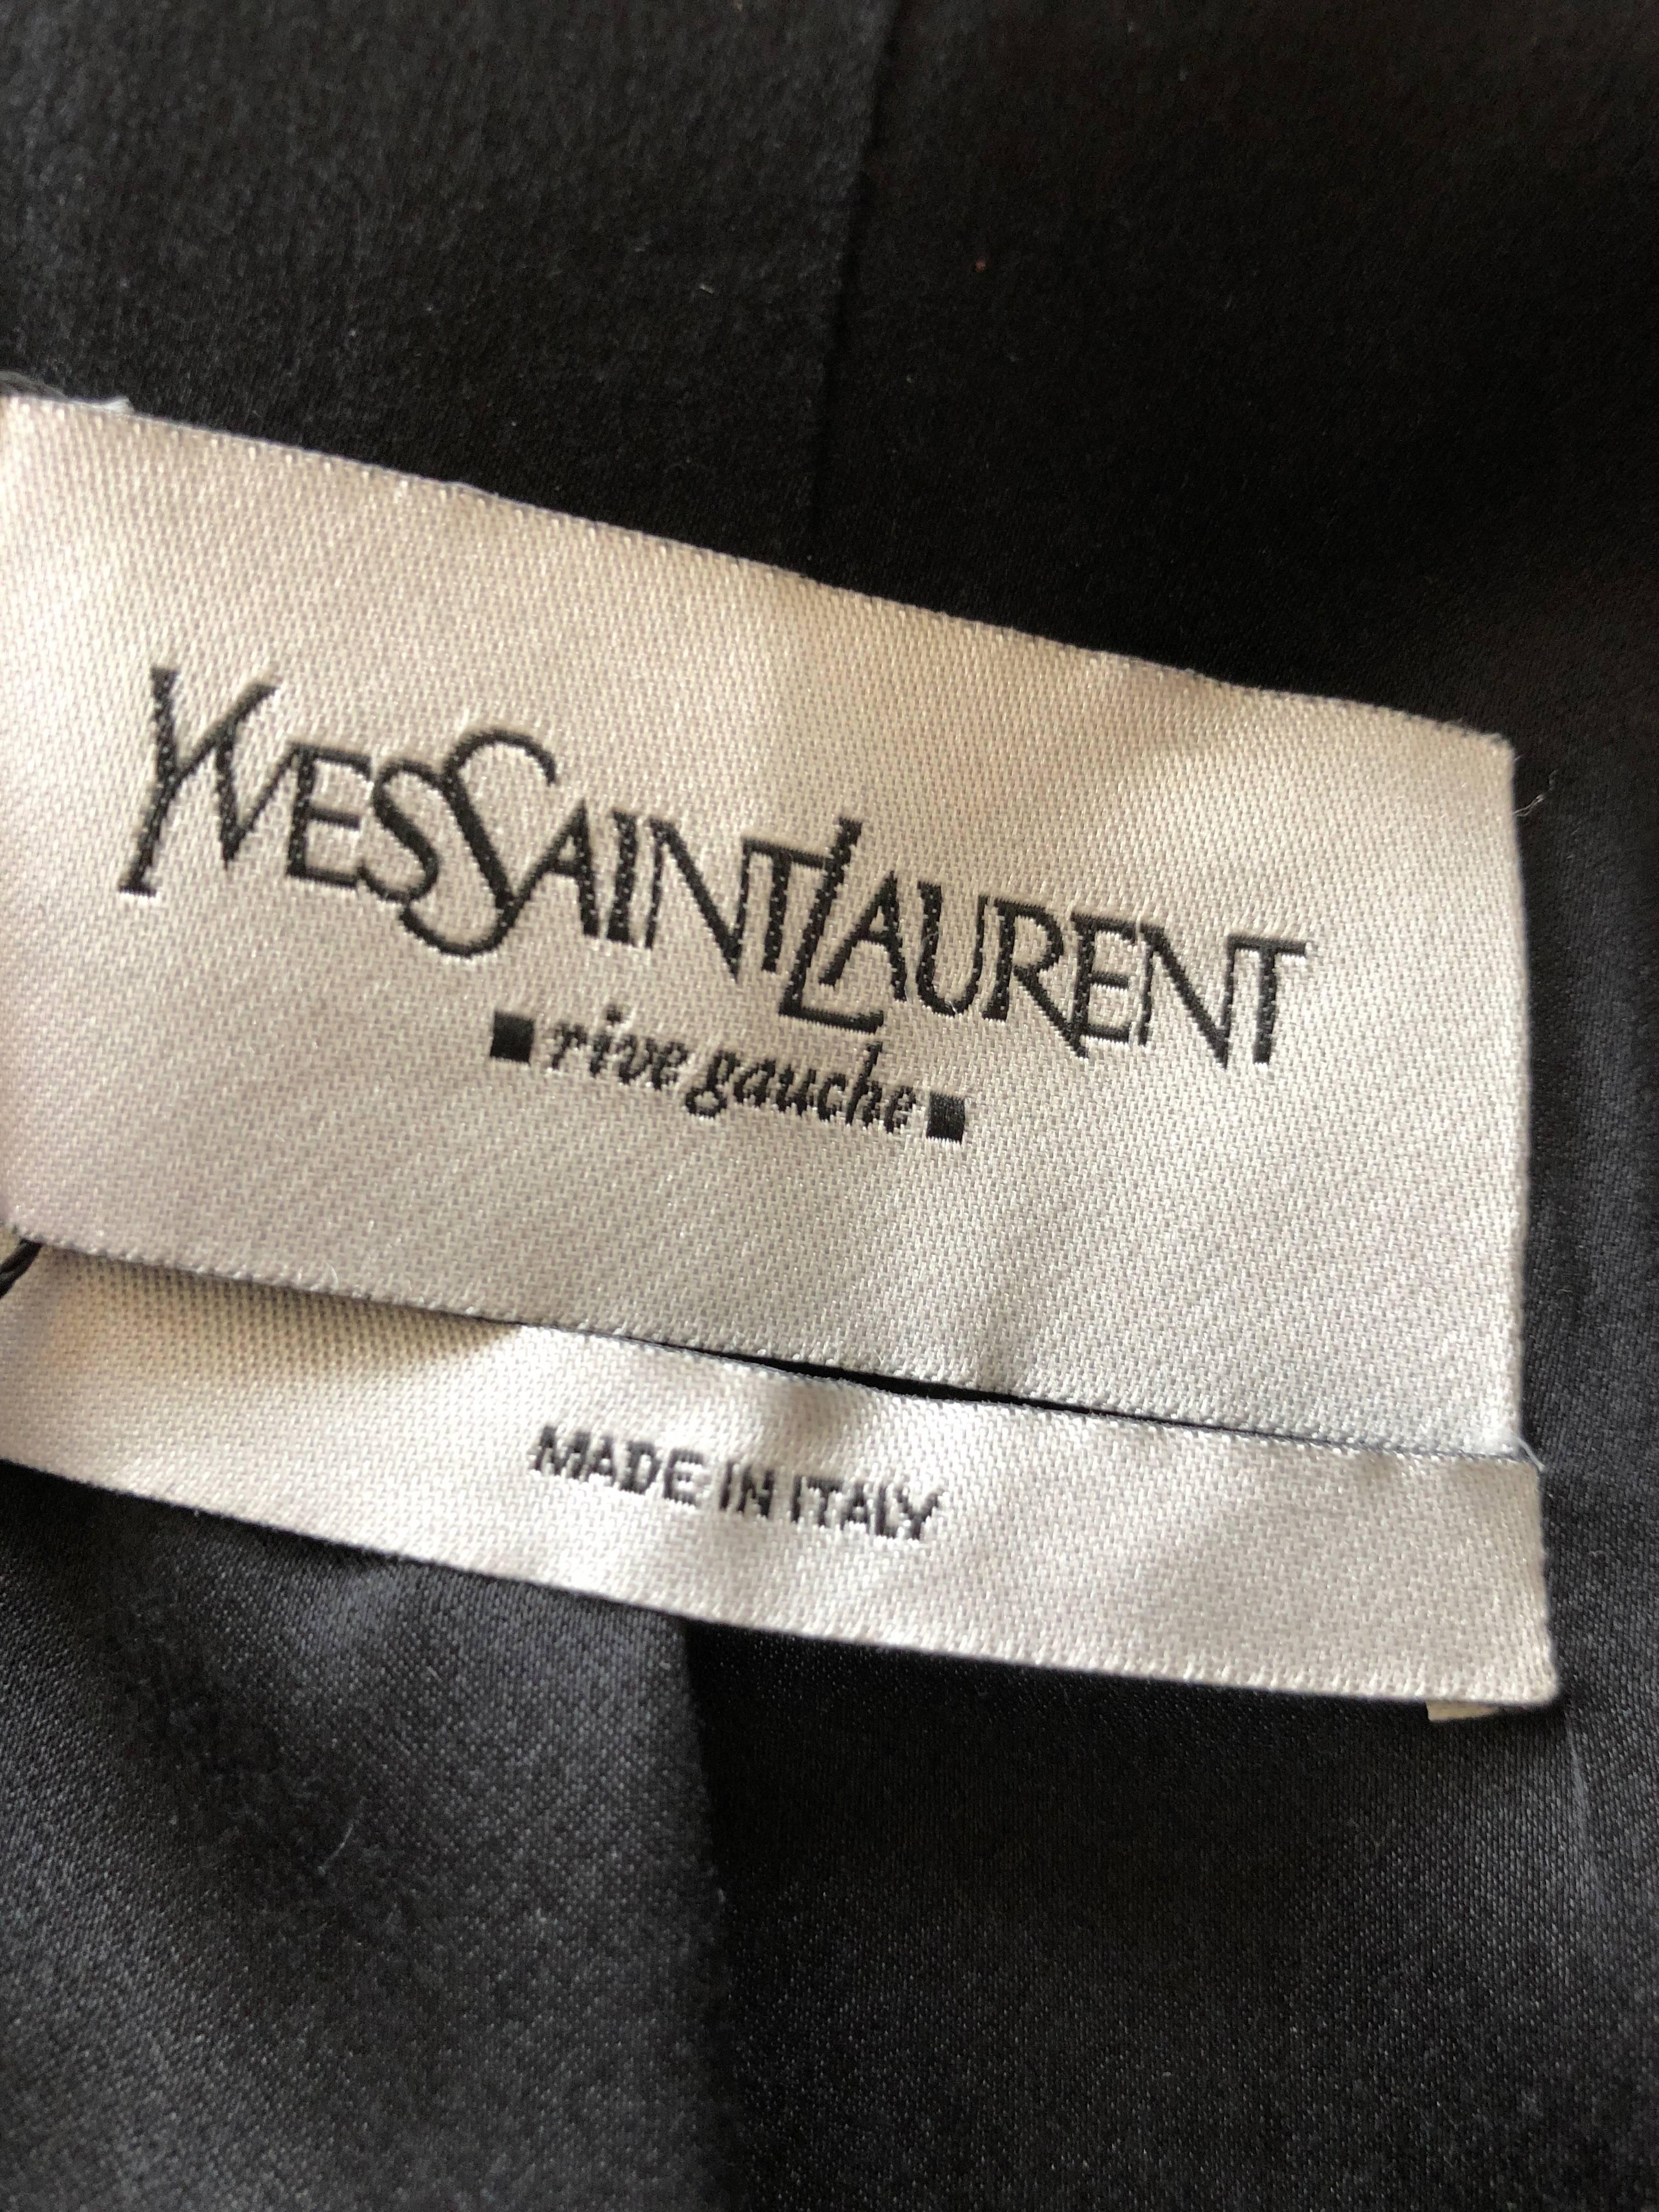 Yves Saint Laurent by Tom Ford Black Wool Ruffle Front Coat from Fall 2004 For Sale 4